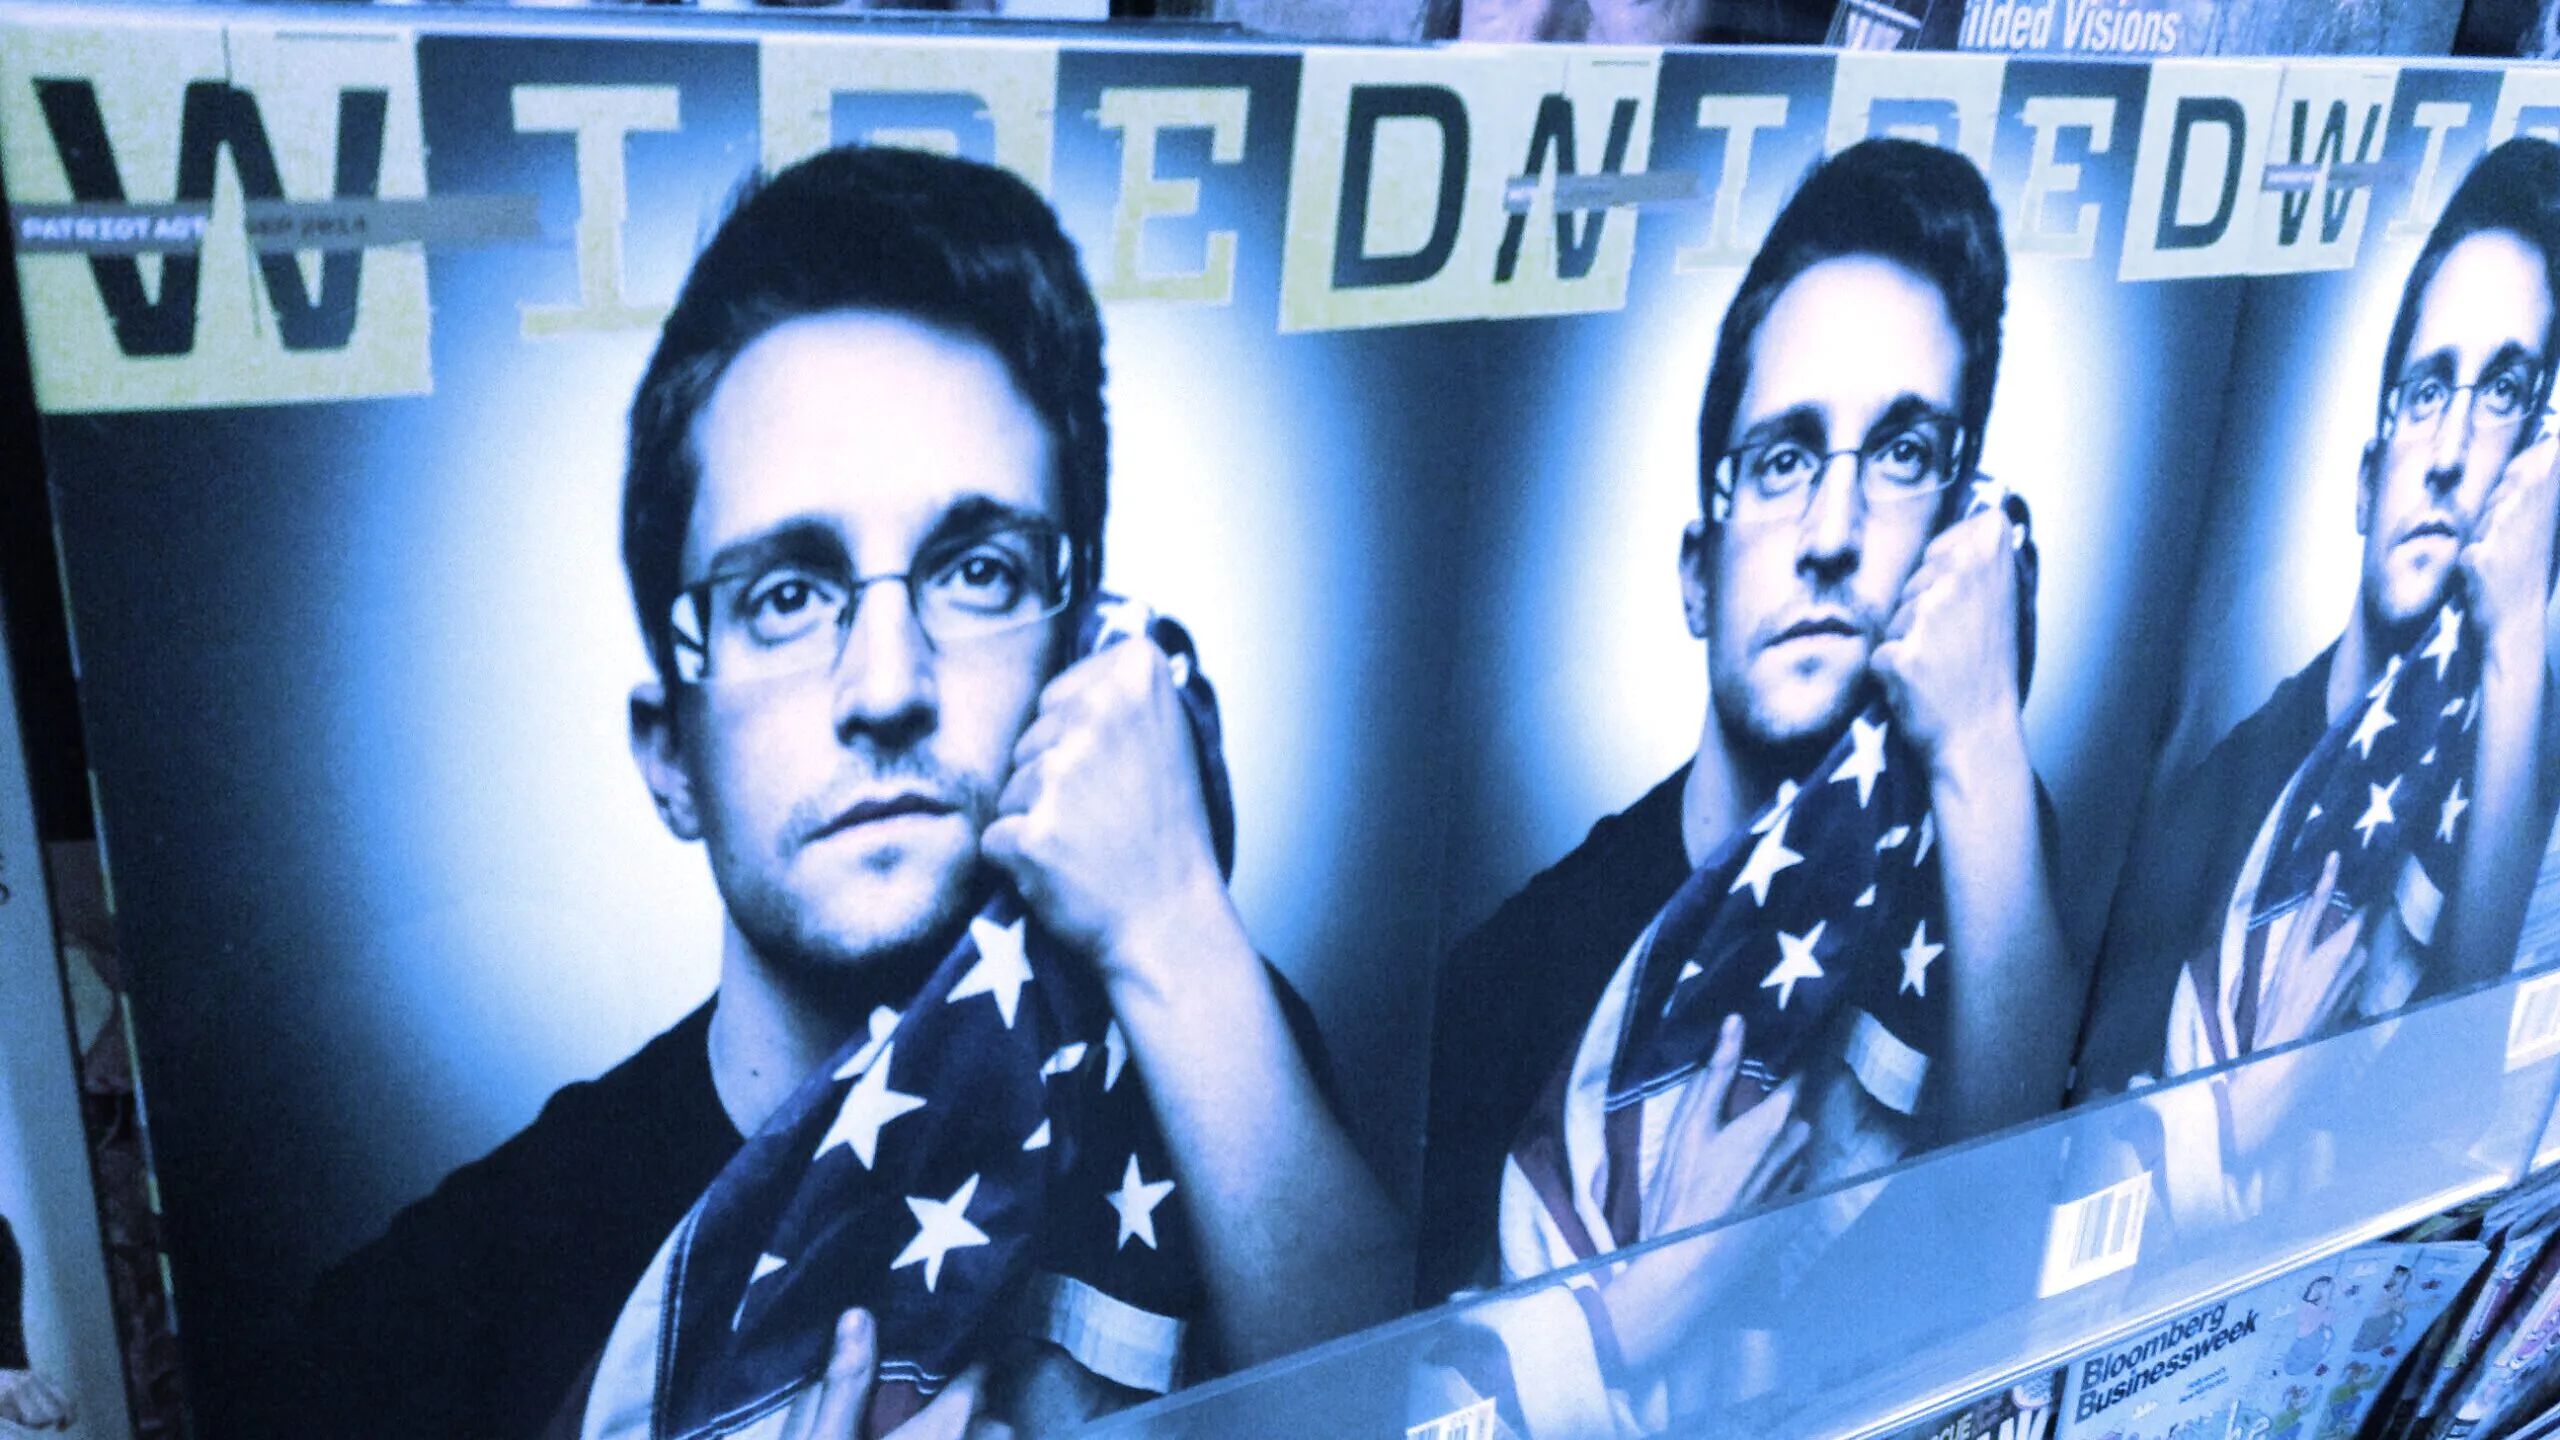 Edward Snowden on the cover of Wired. Image:(CC BY 2.0) Mike Mozart